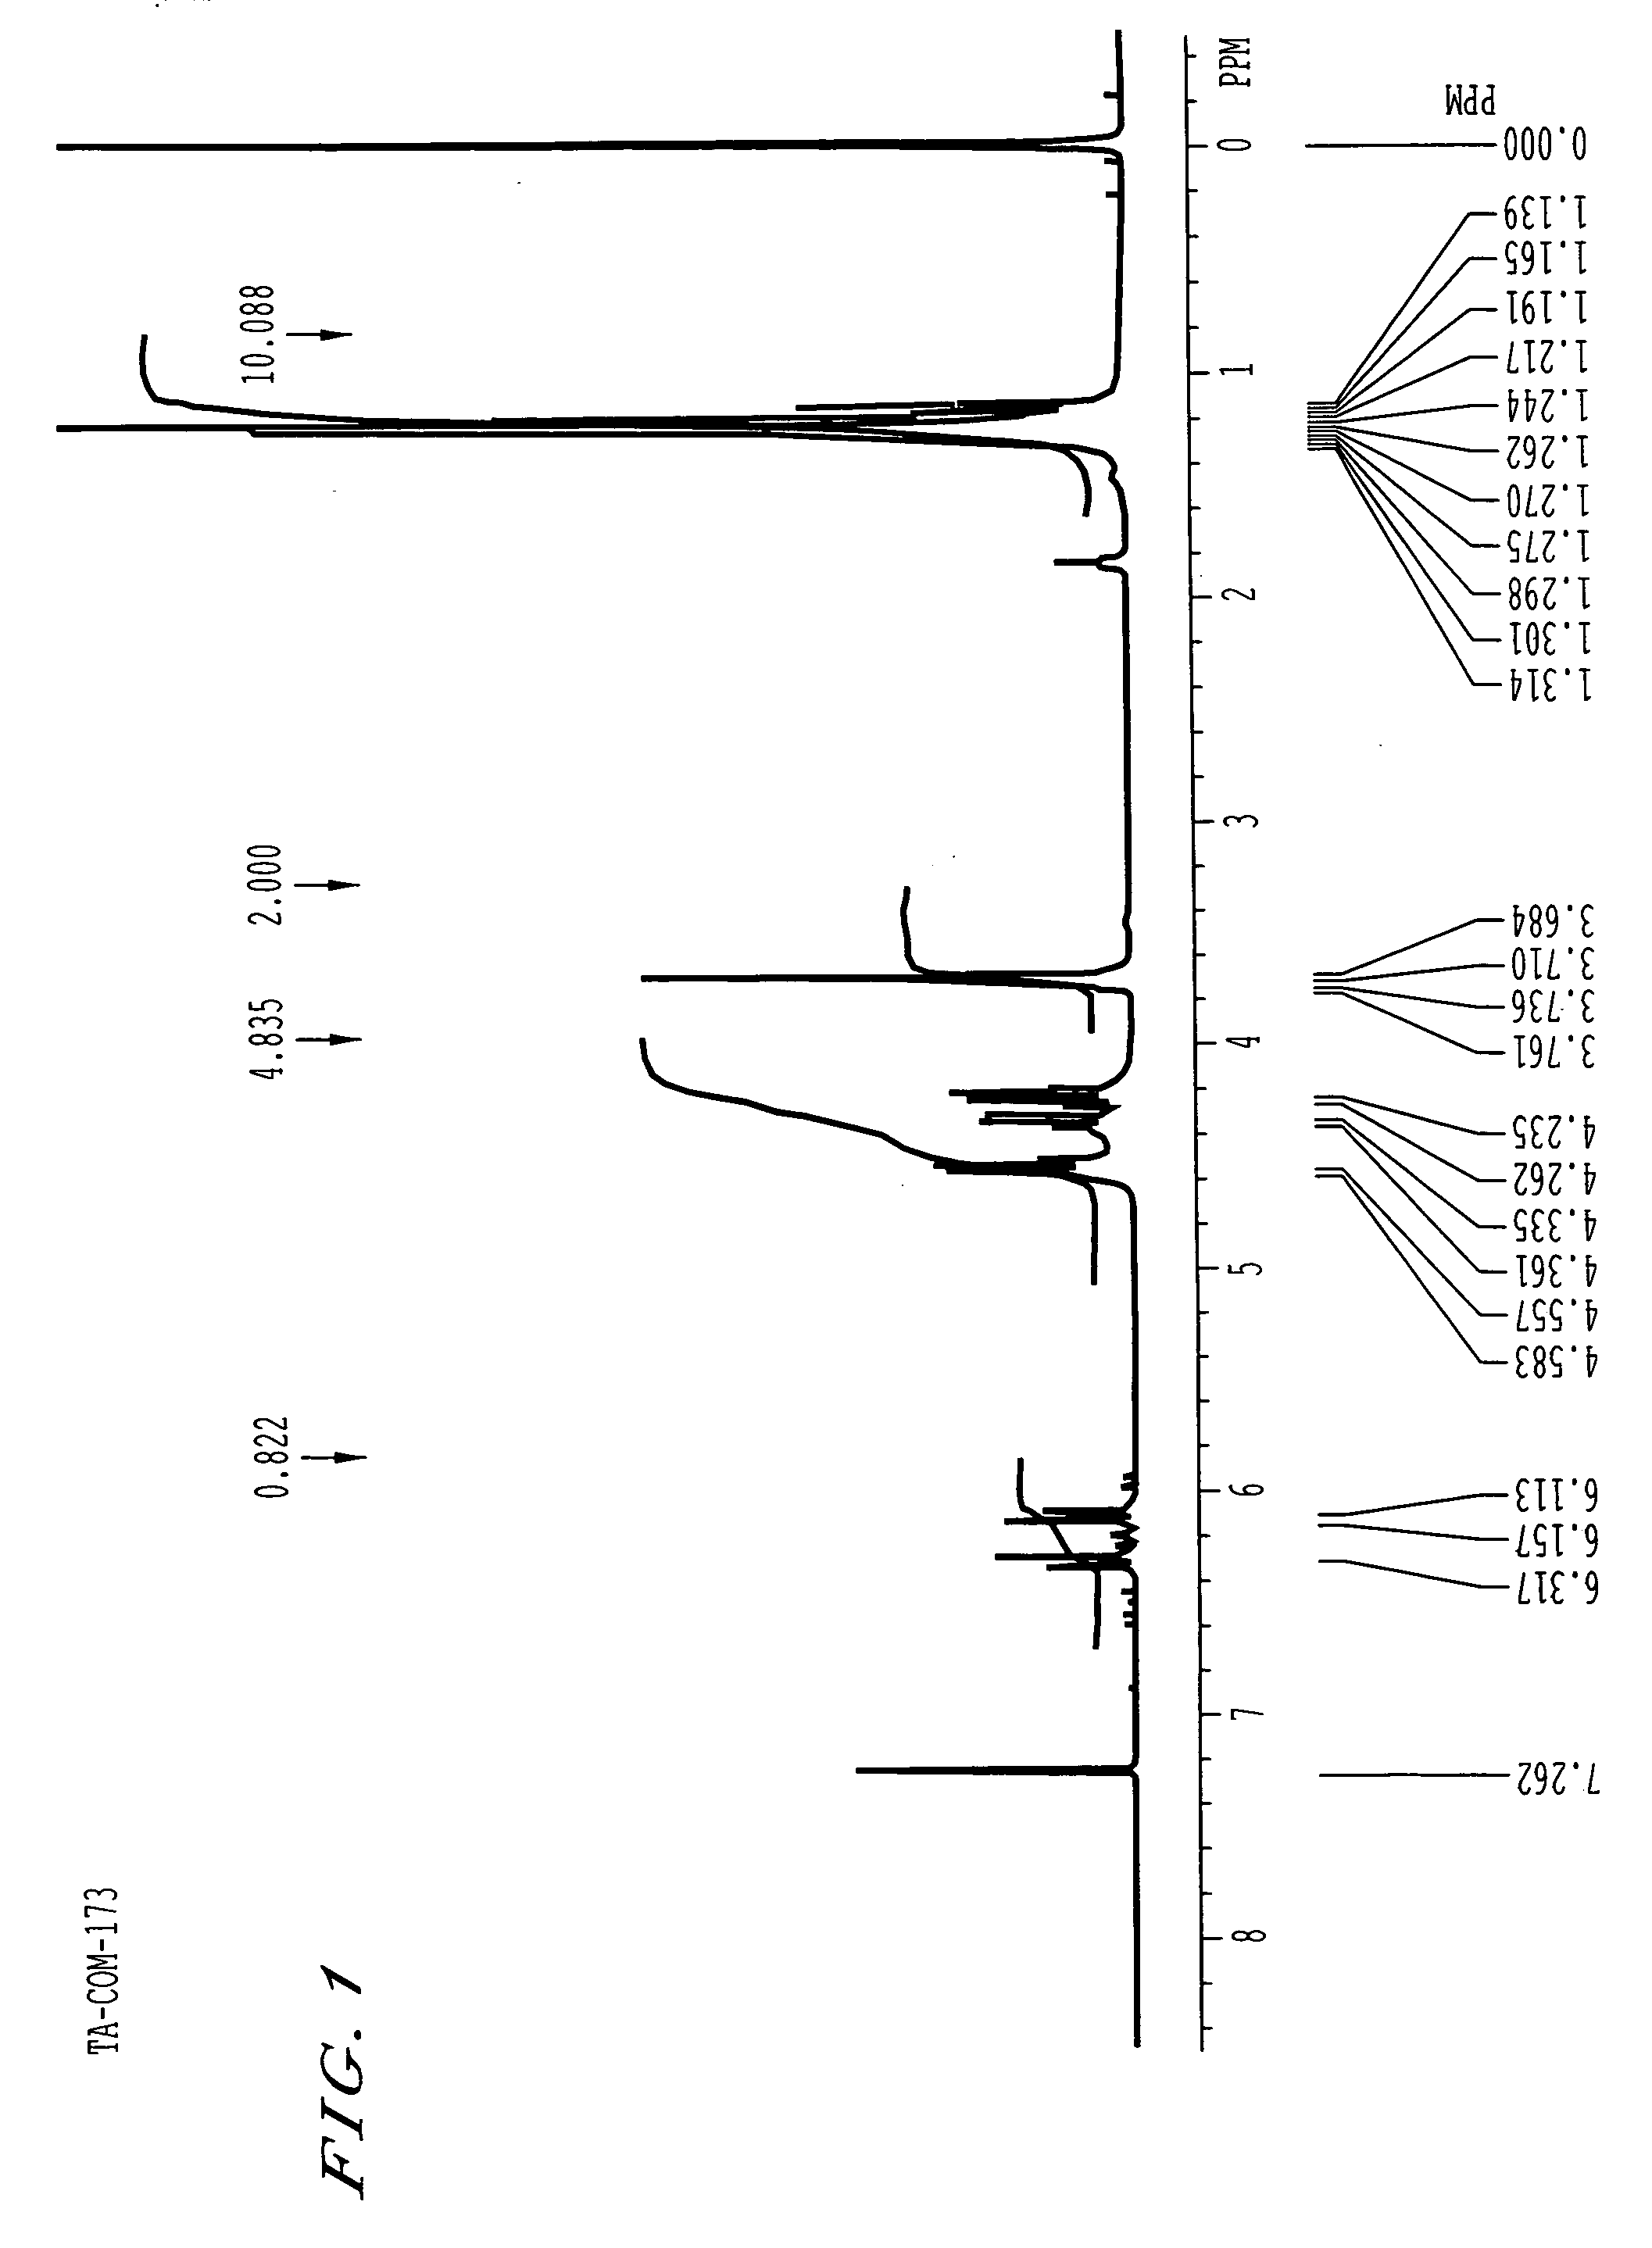 Composition for forming a coating film, method of preparing the composition, tantalum oxide film and method of forming the tantalum oxide film